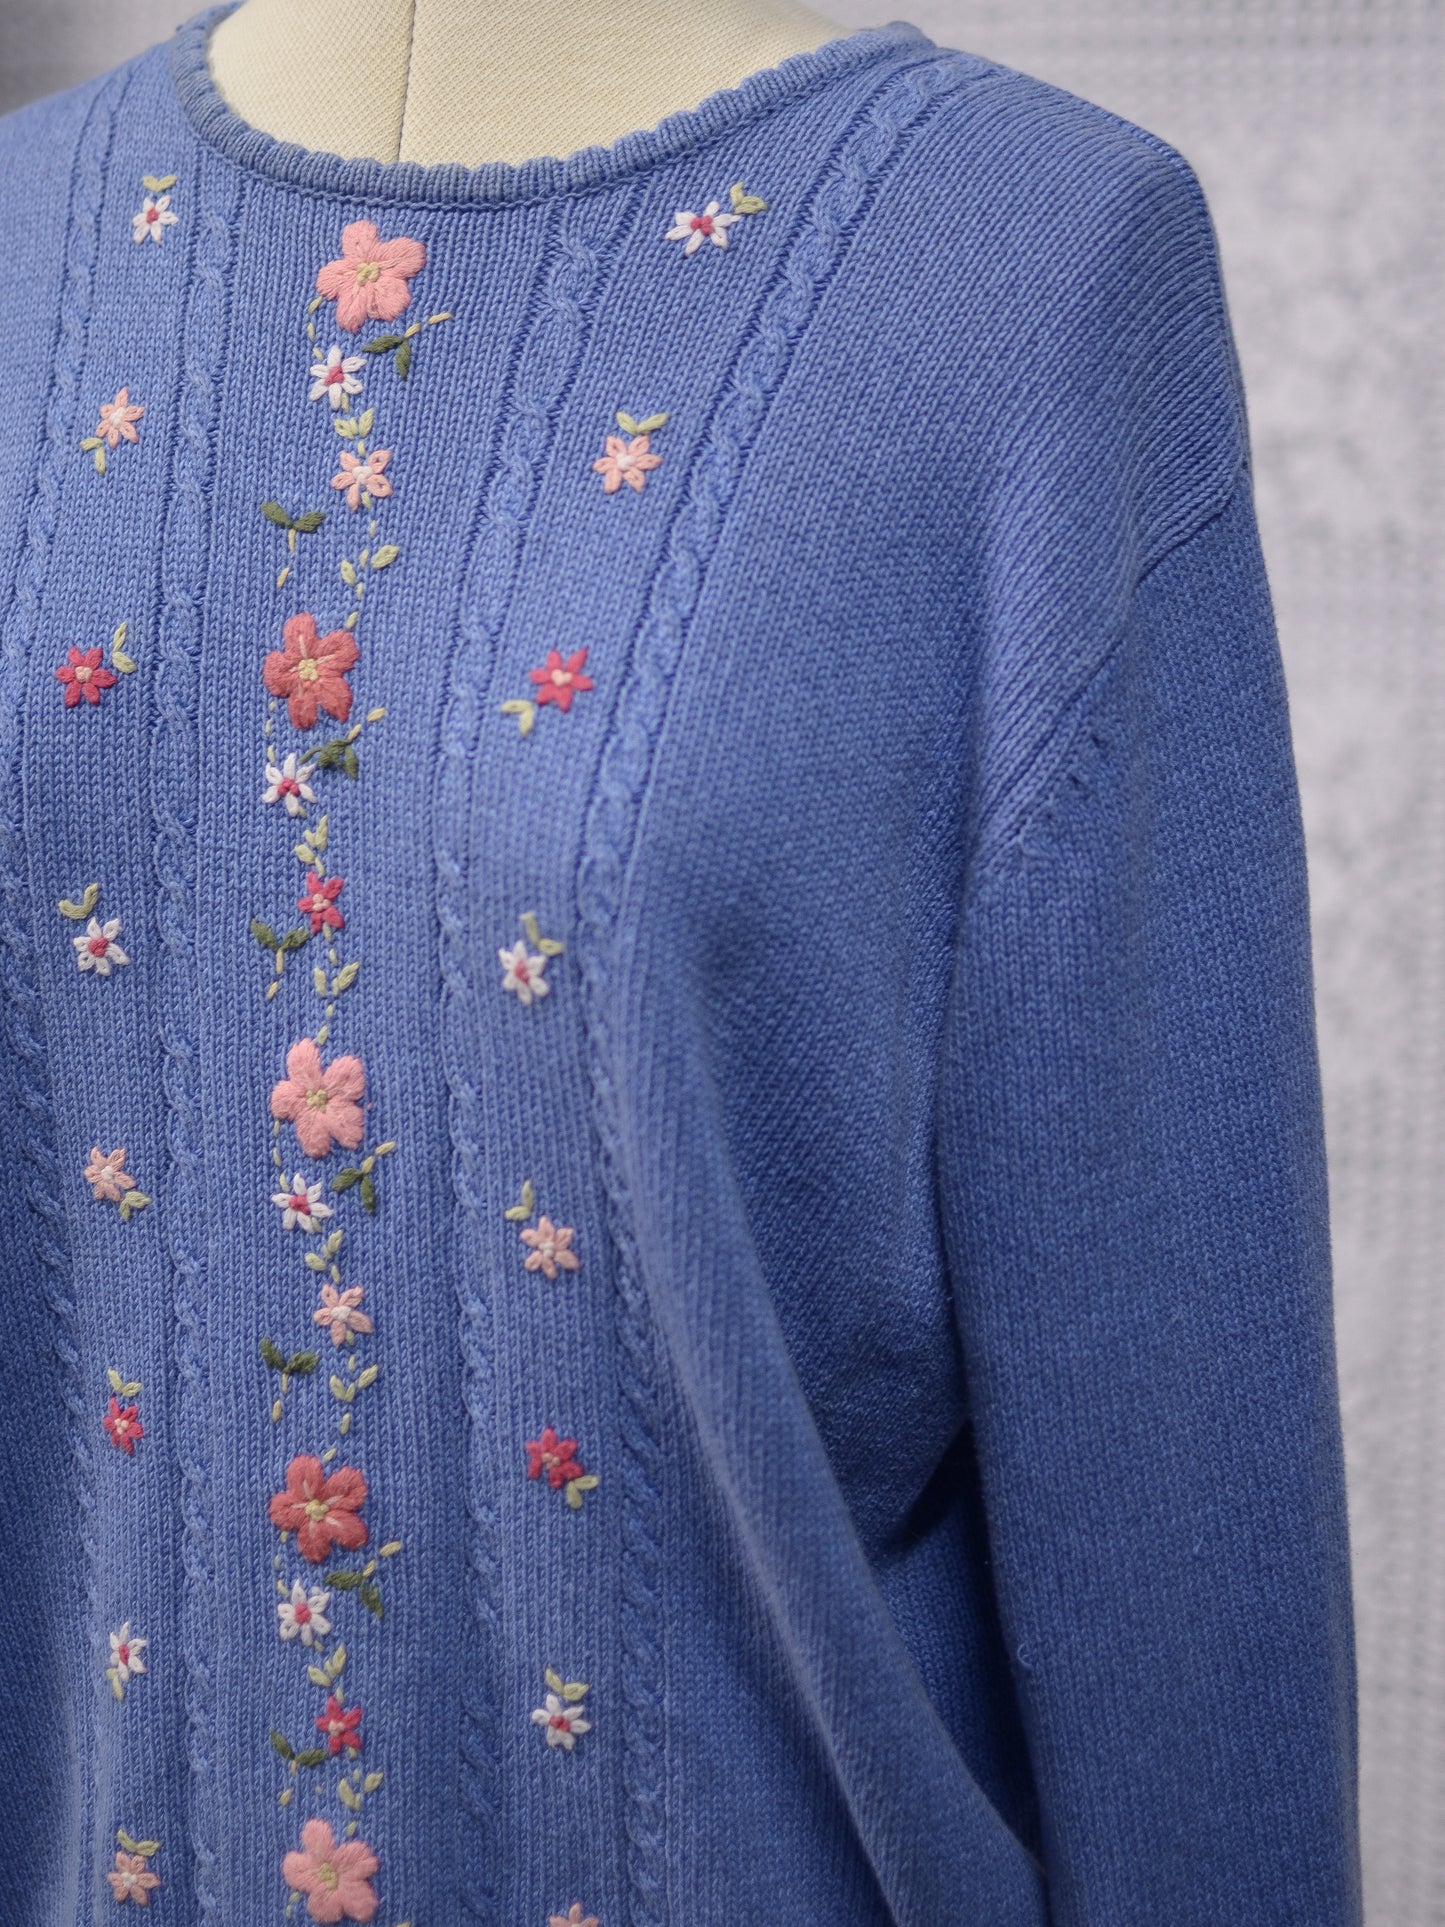 1990s Tulchan blue and pink embroidered floral jumper